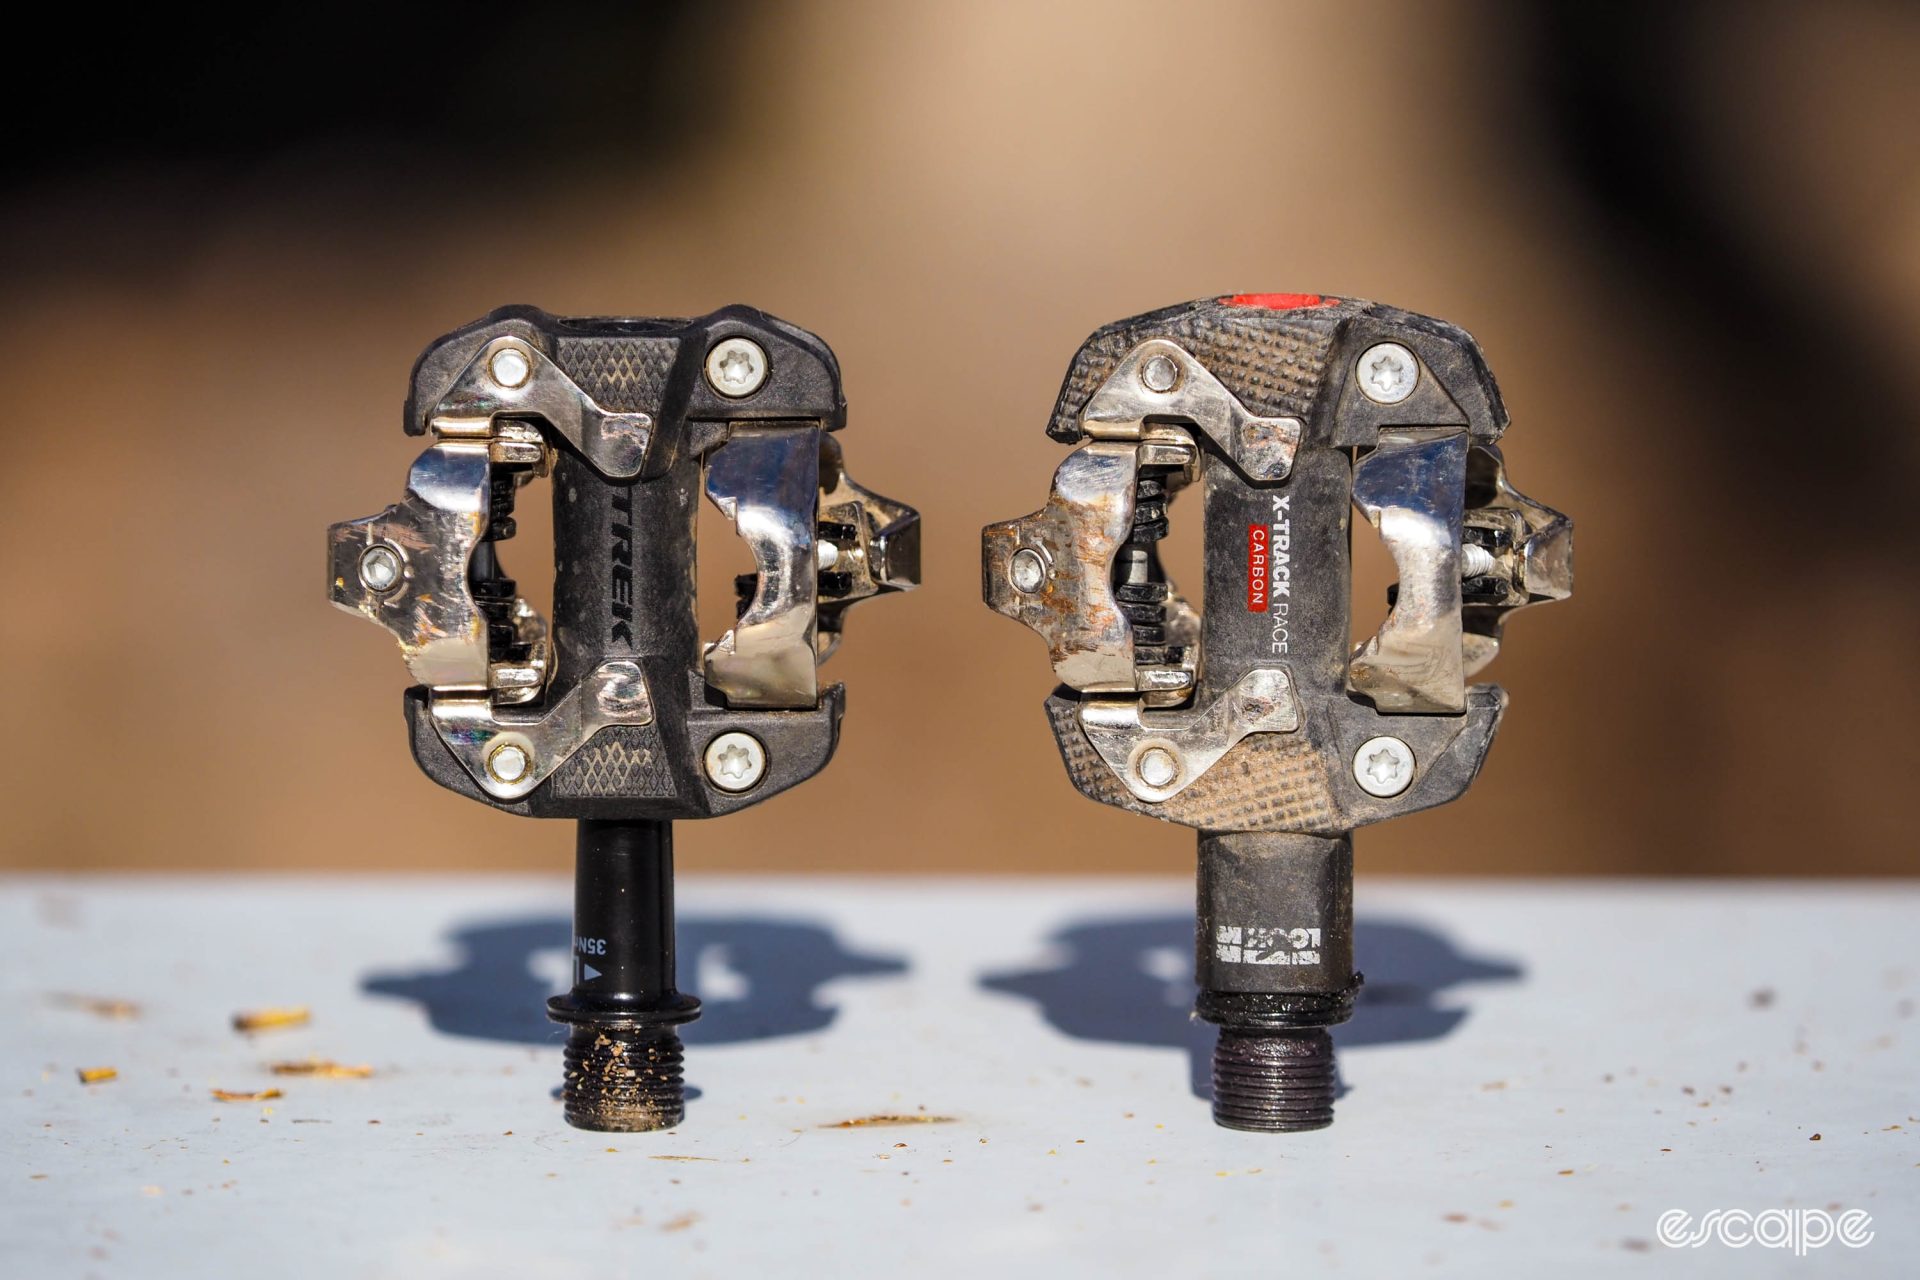 Trek Kovee Pro pedal compared to Look X-Track Race Carbon